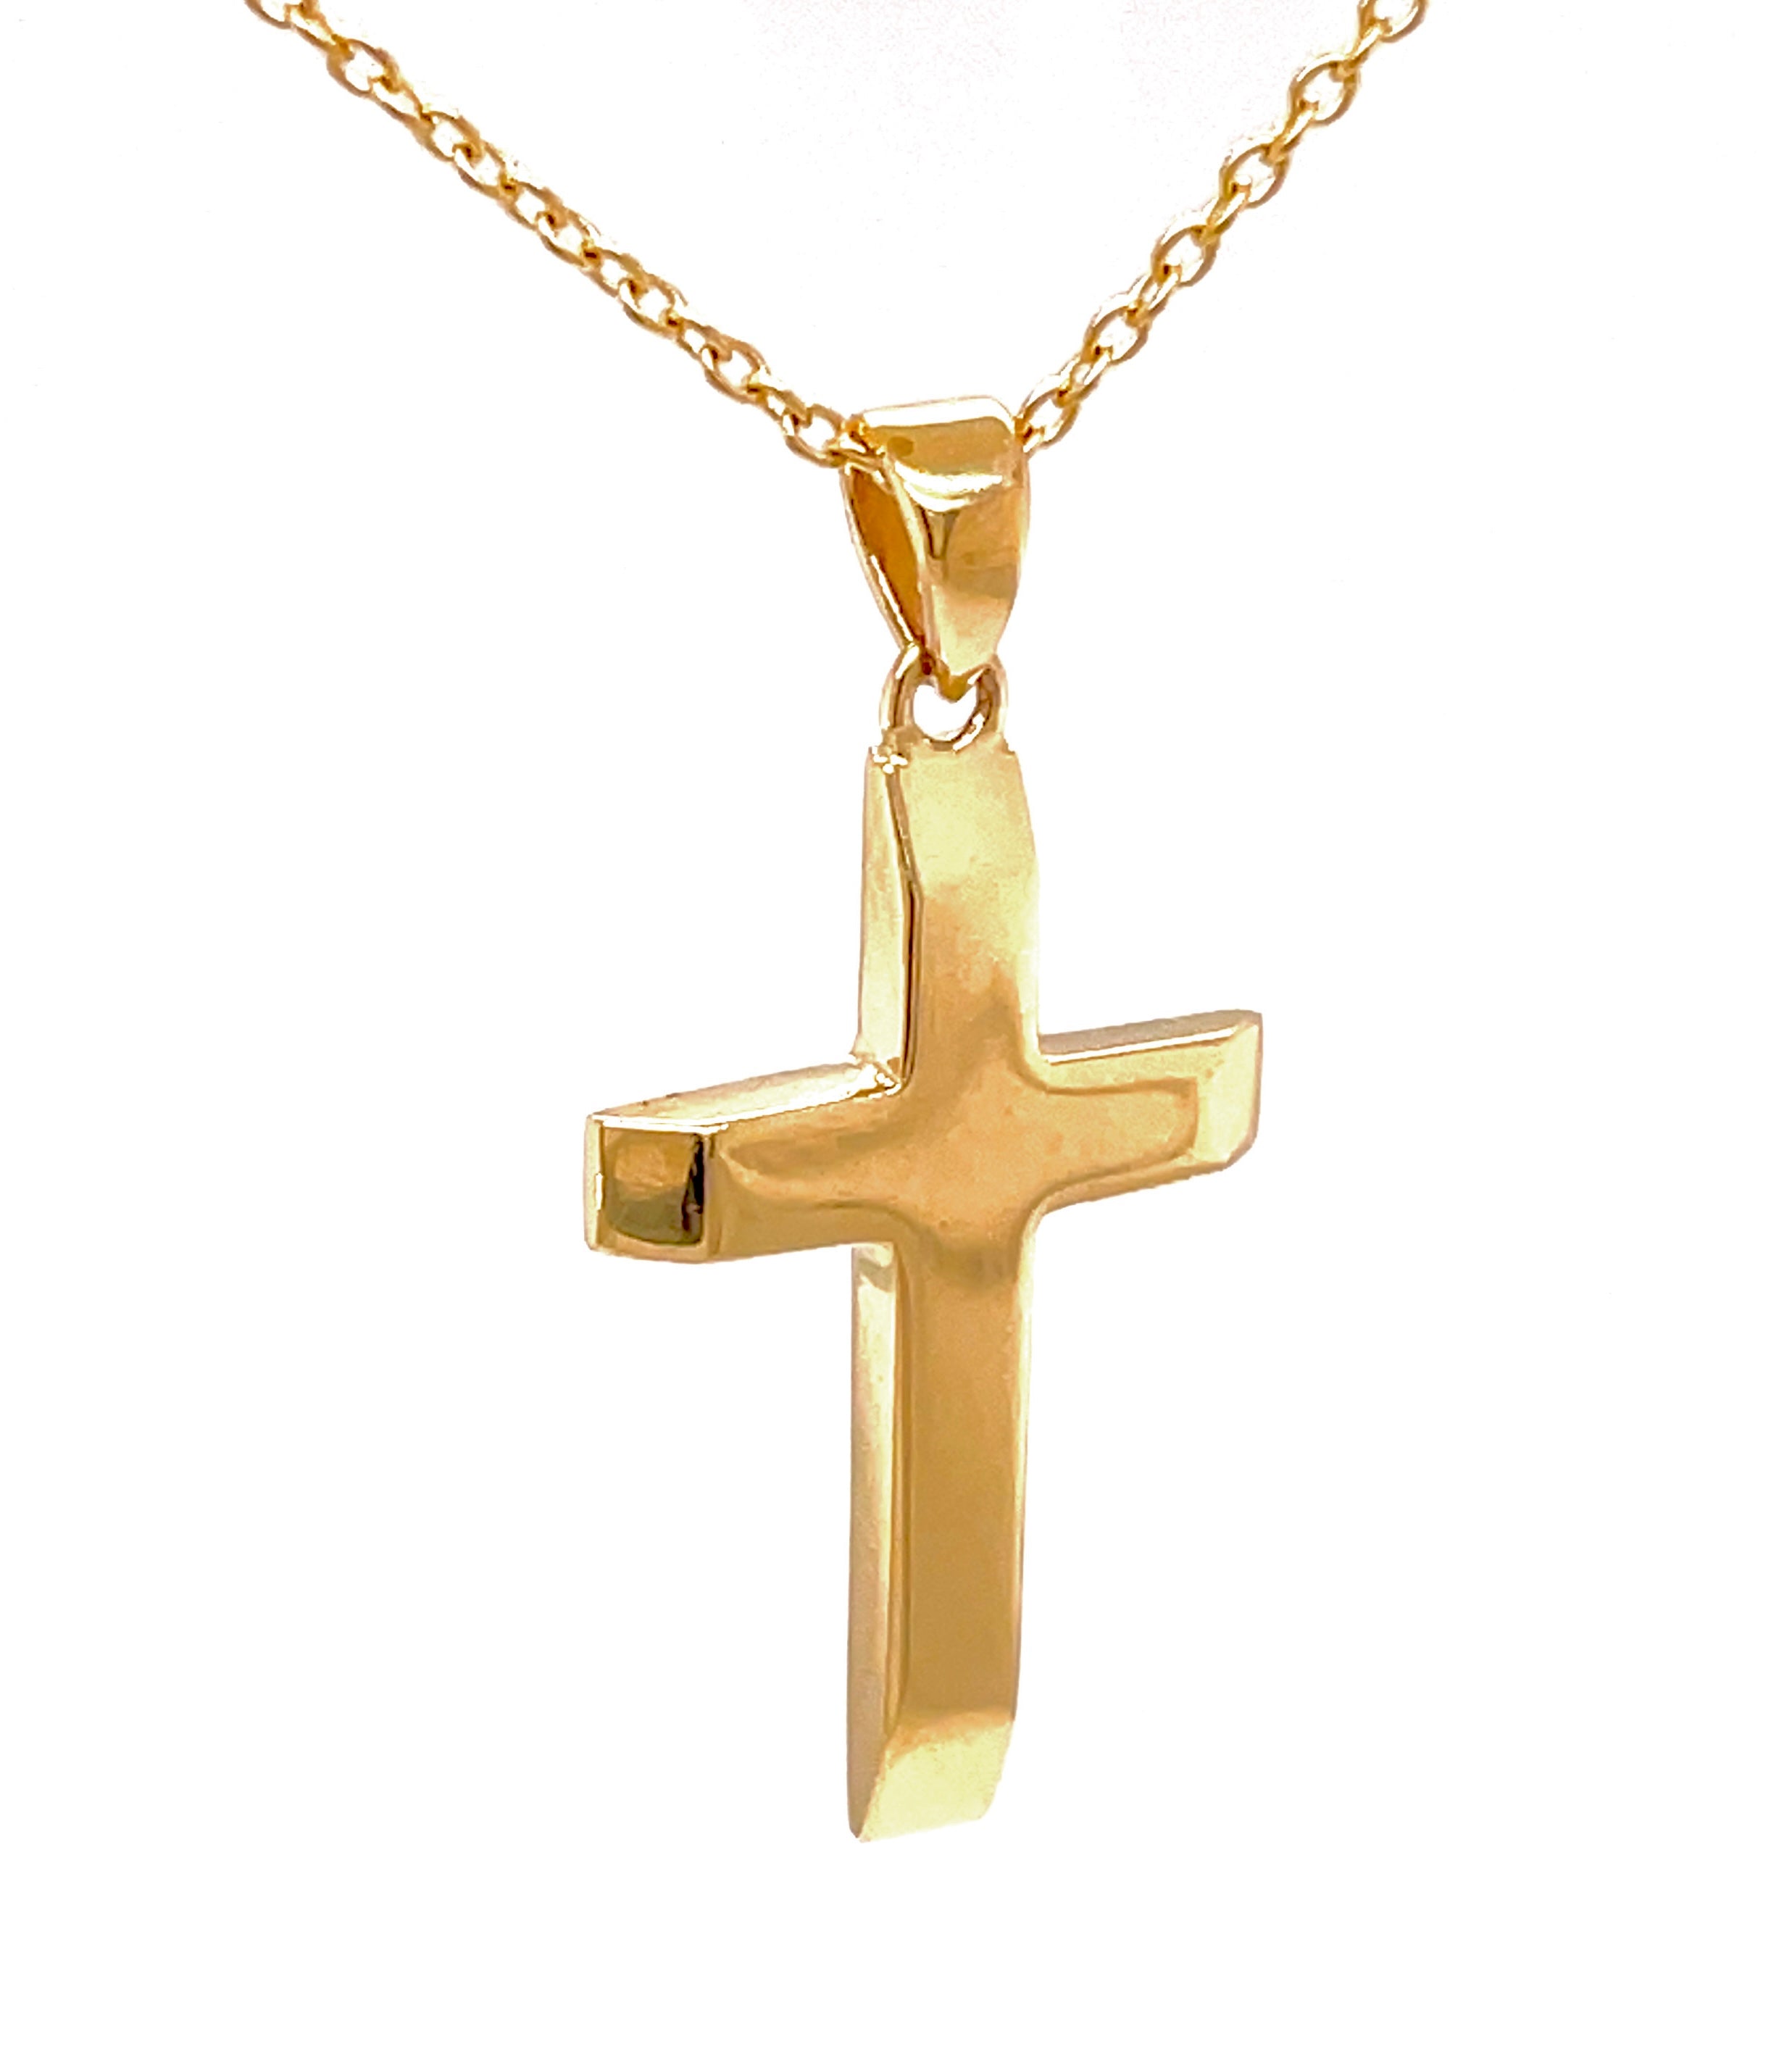 Crafted from 14k yellow gold and Italian-made secure bail, this cross reaches an impressive 1" in length - a timeless statement piece that stands out from the rest.